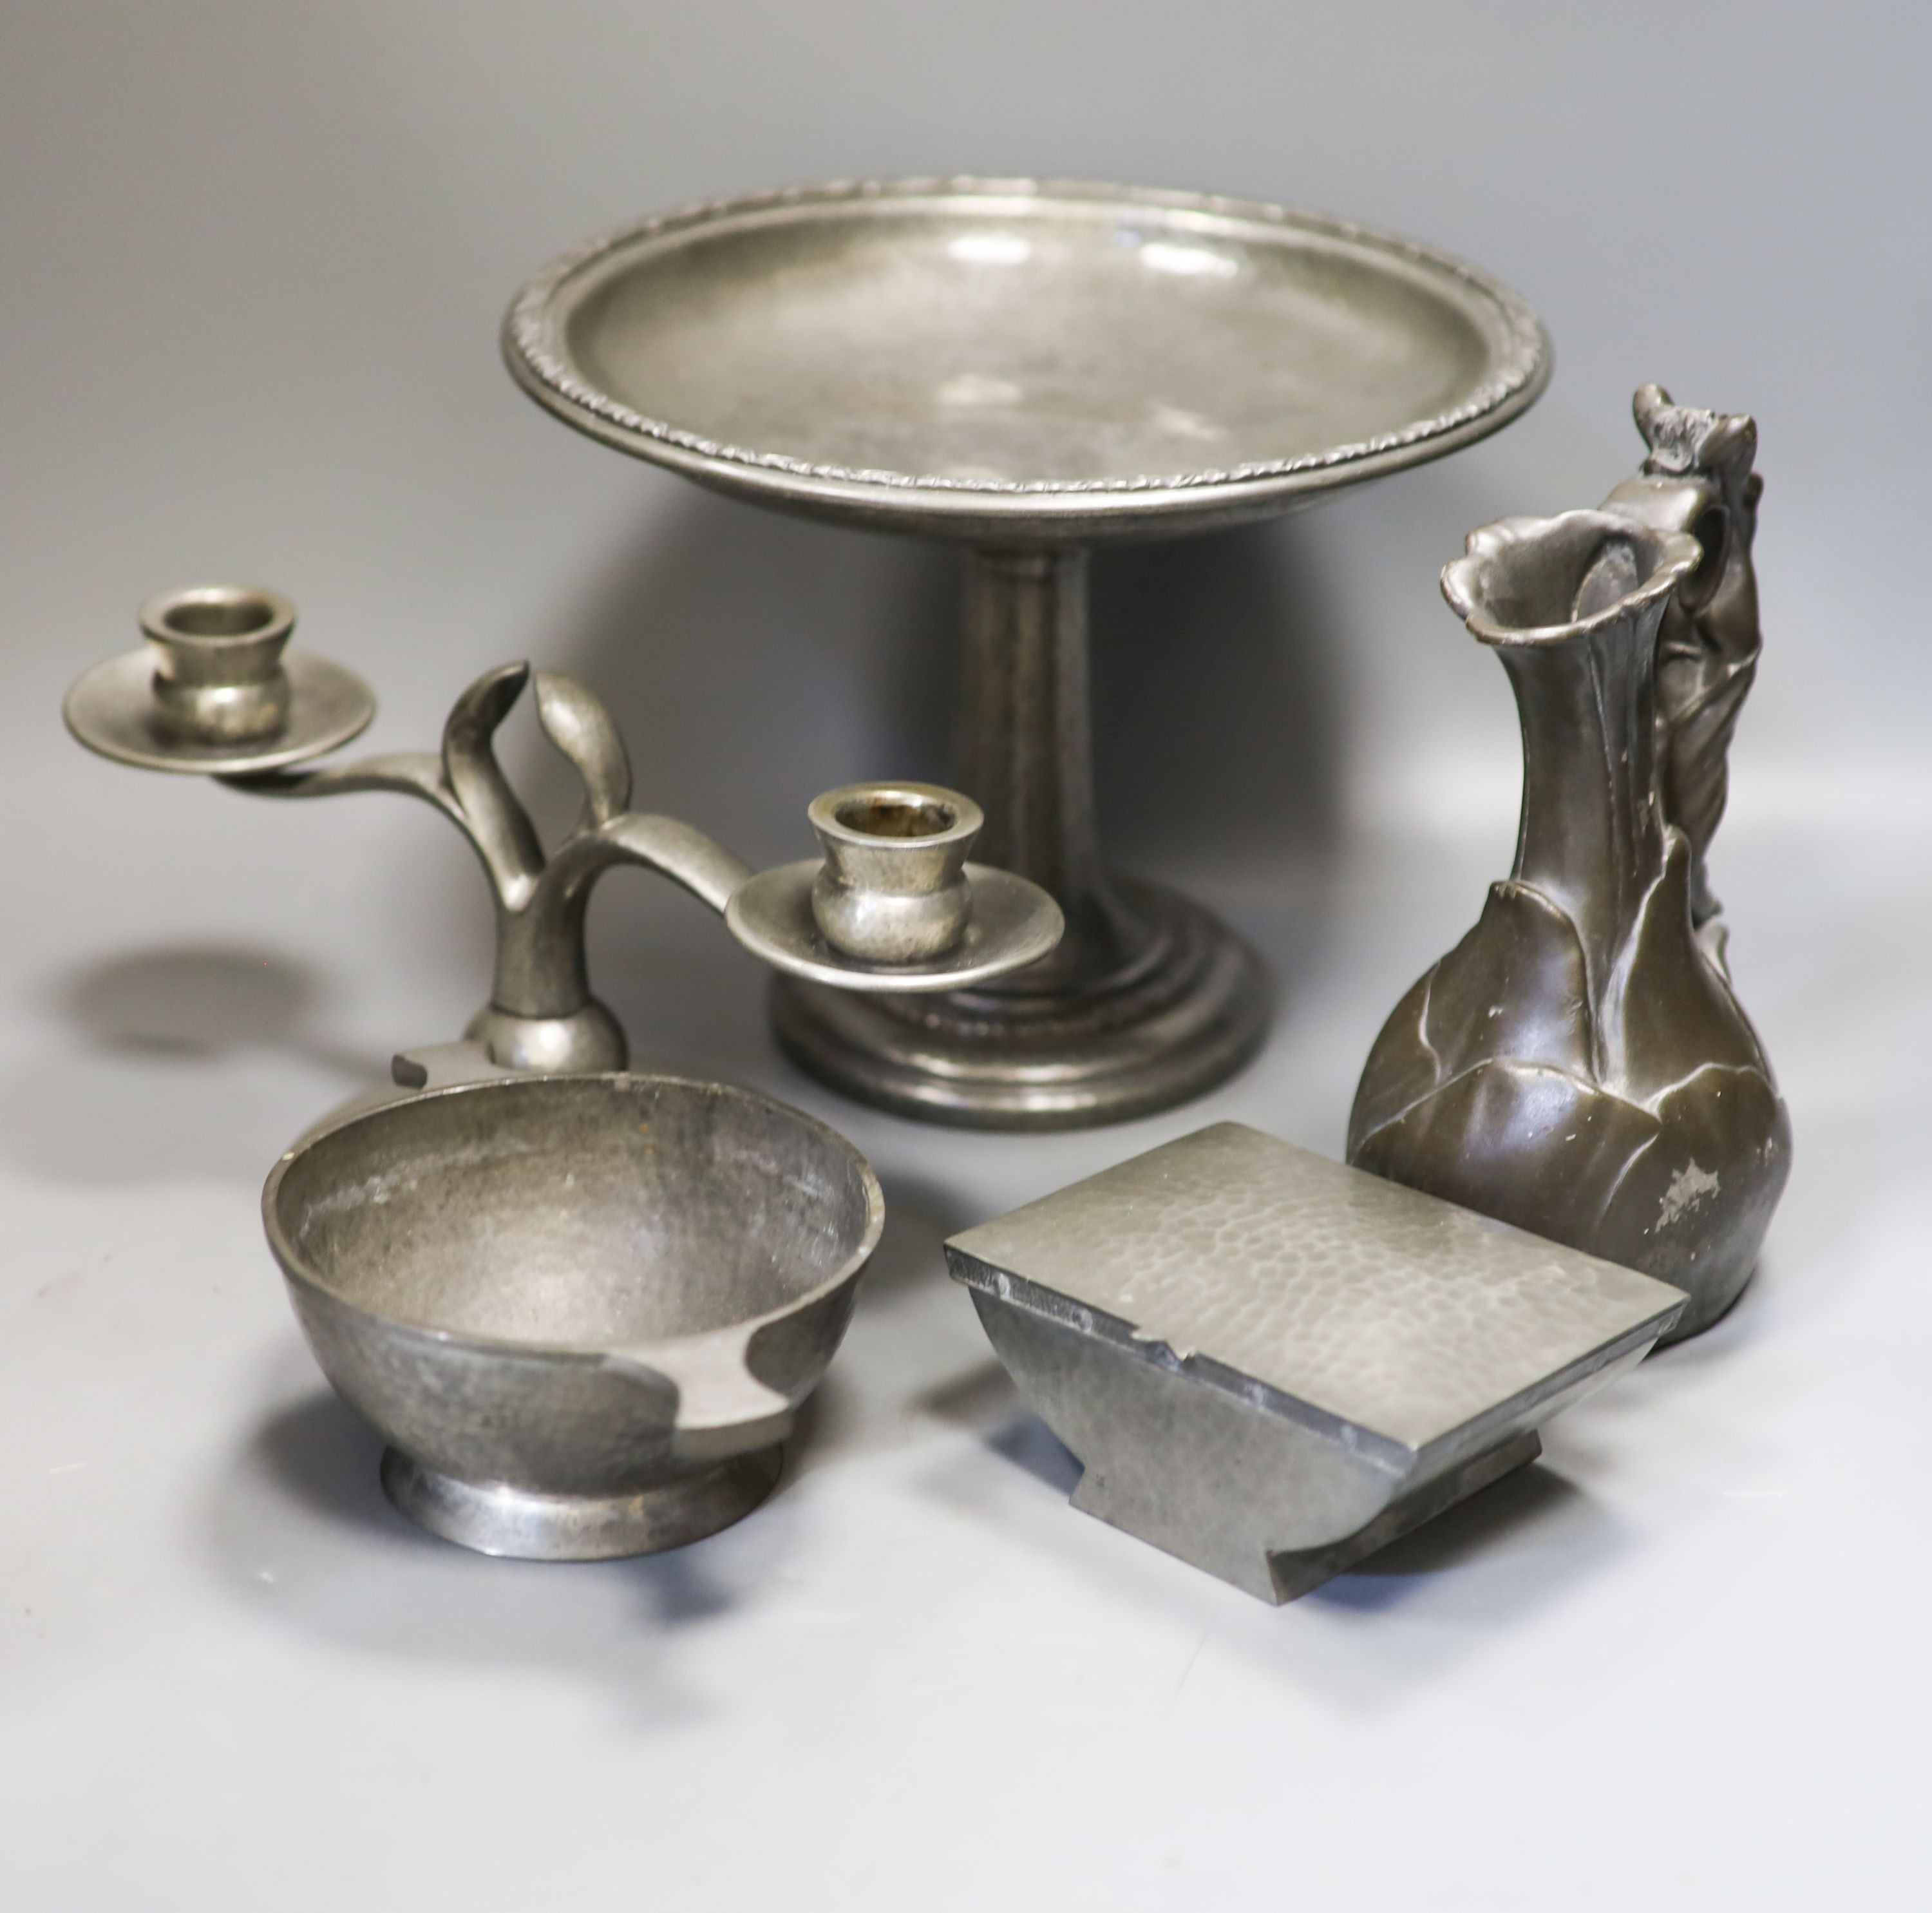 J Garnier - cast pewter jug in Art Nouveau style, Two Liberty's Tudric hammered pewter items and two other pewter wares